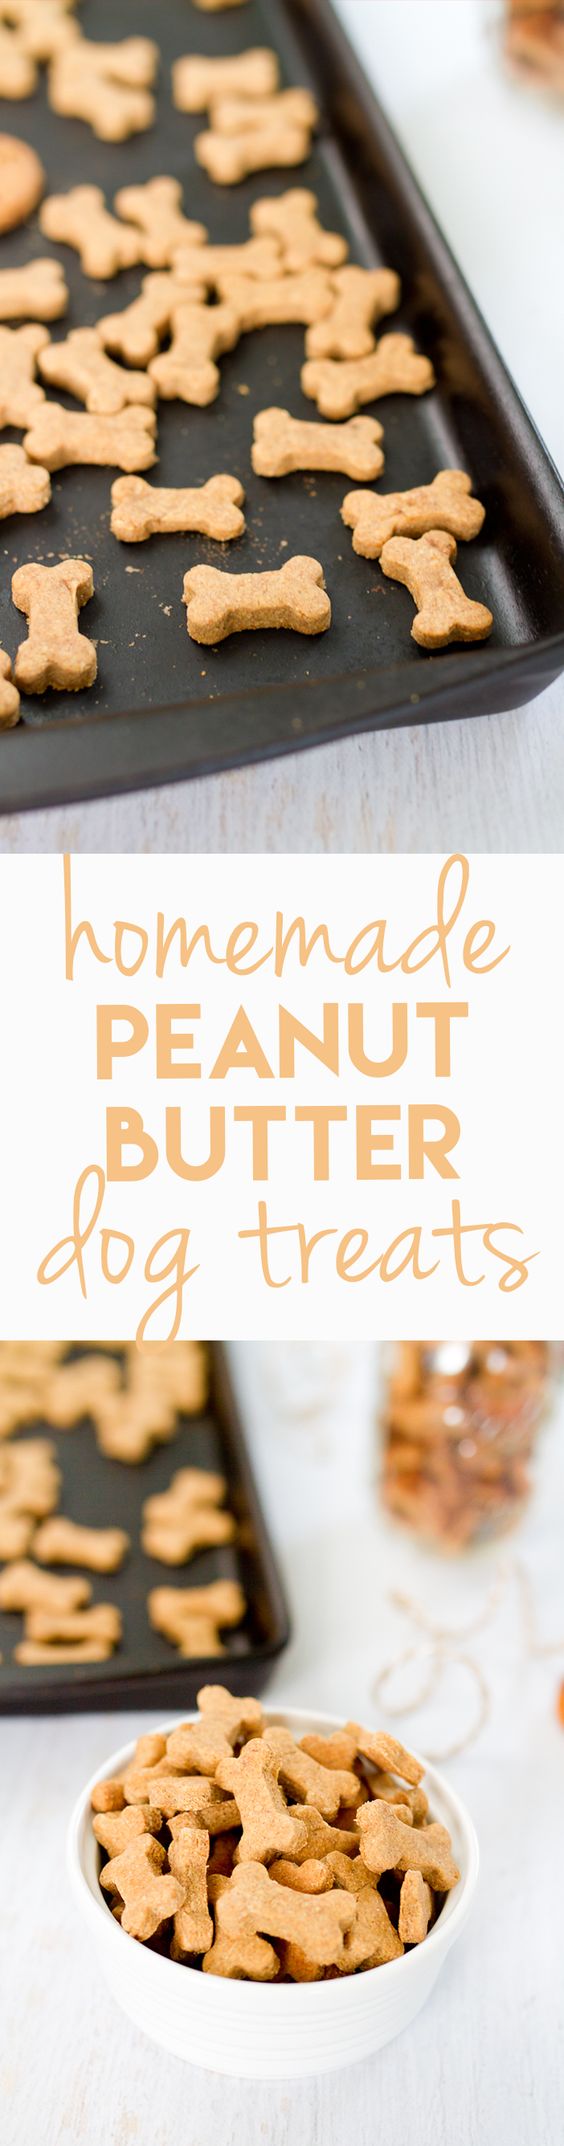 Making homemade snacks for your four-legged friend is a breeze with this simple peanut butter dog treat recipe. Pups will love the peanut butter flavor!